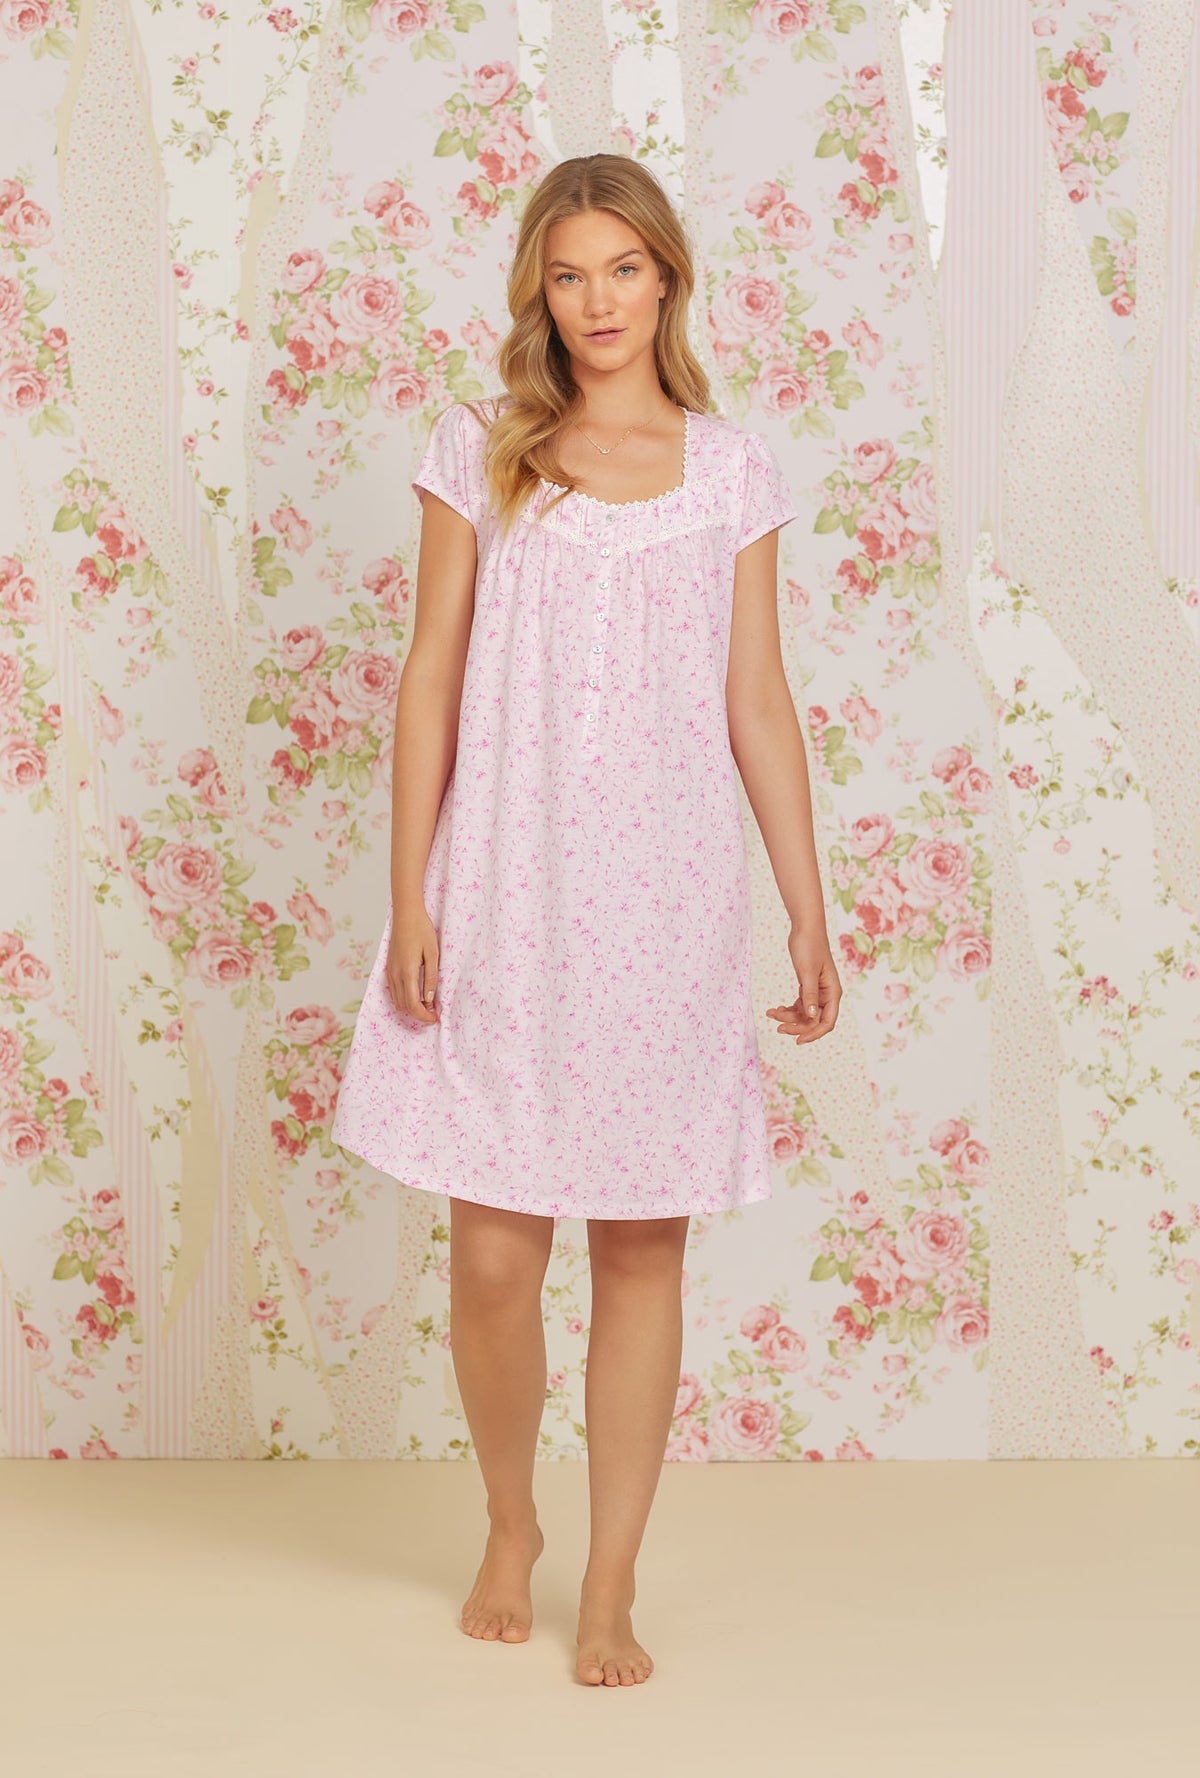 A lady wearing pink cap sleeve short cotton knit nightgown with soft pink floral print.